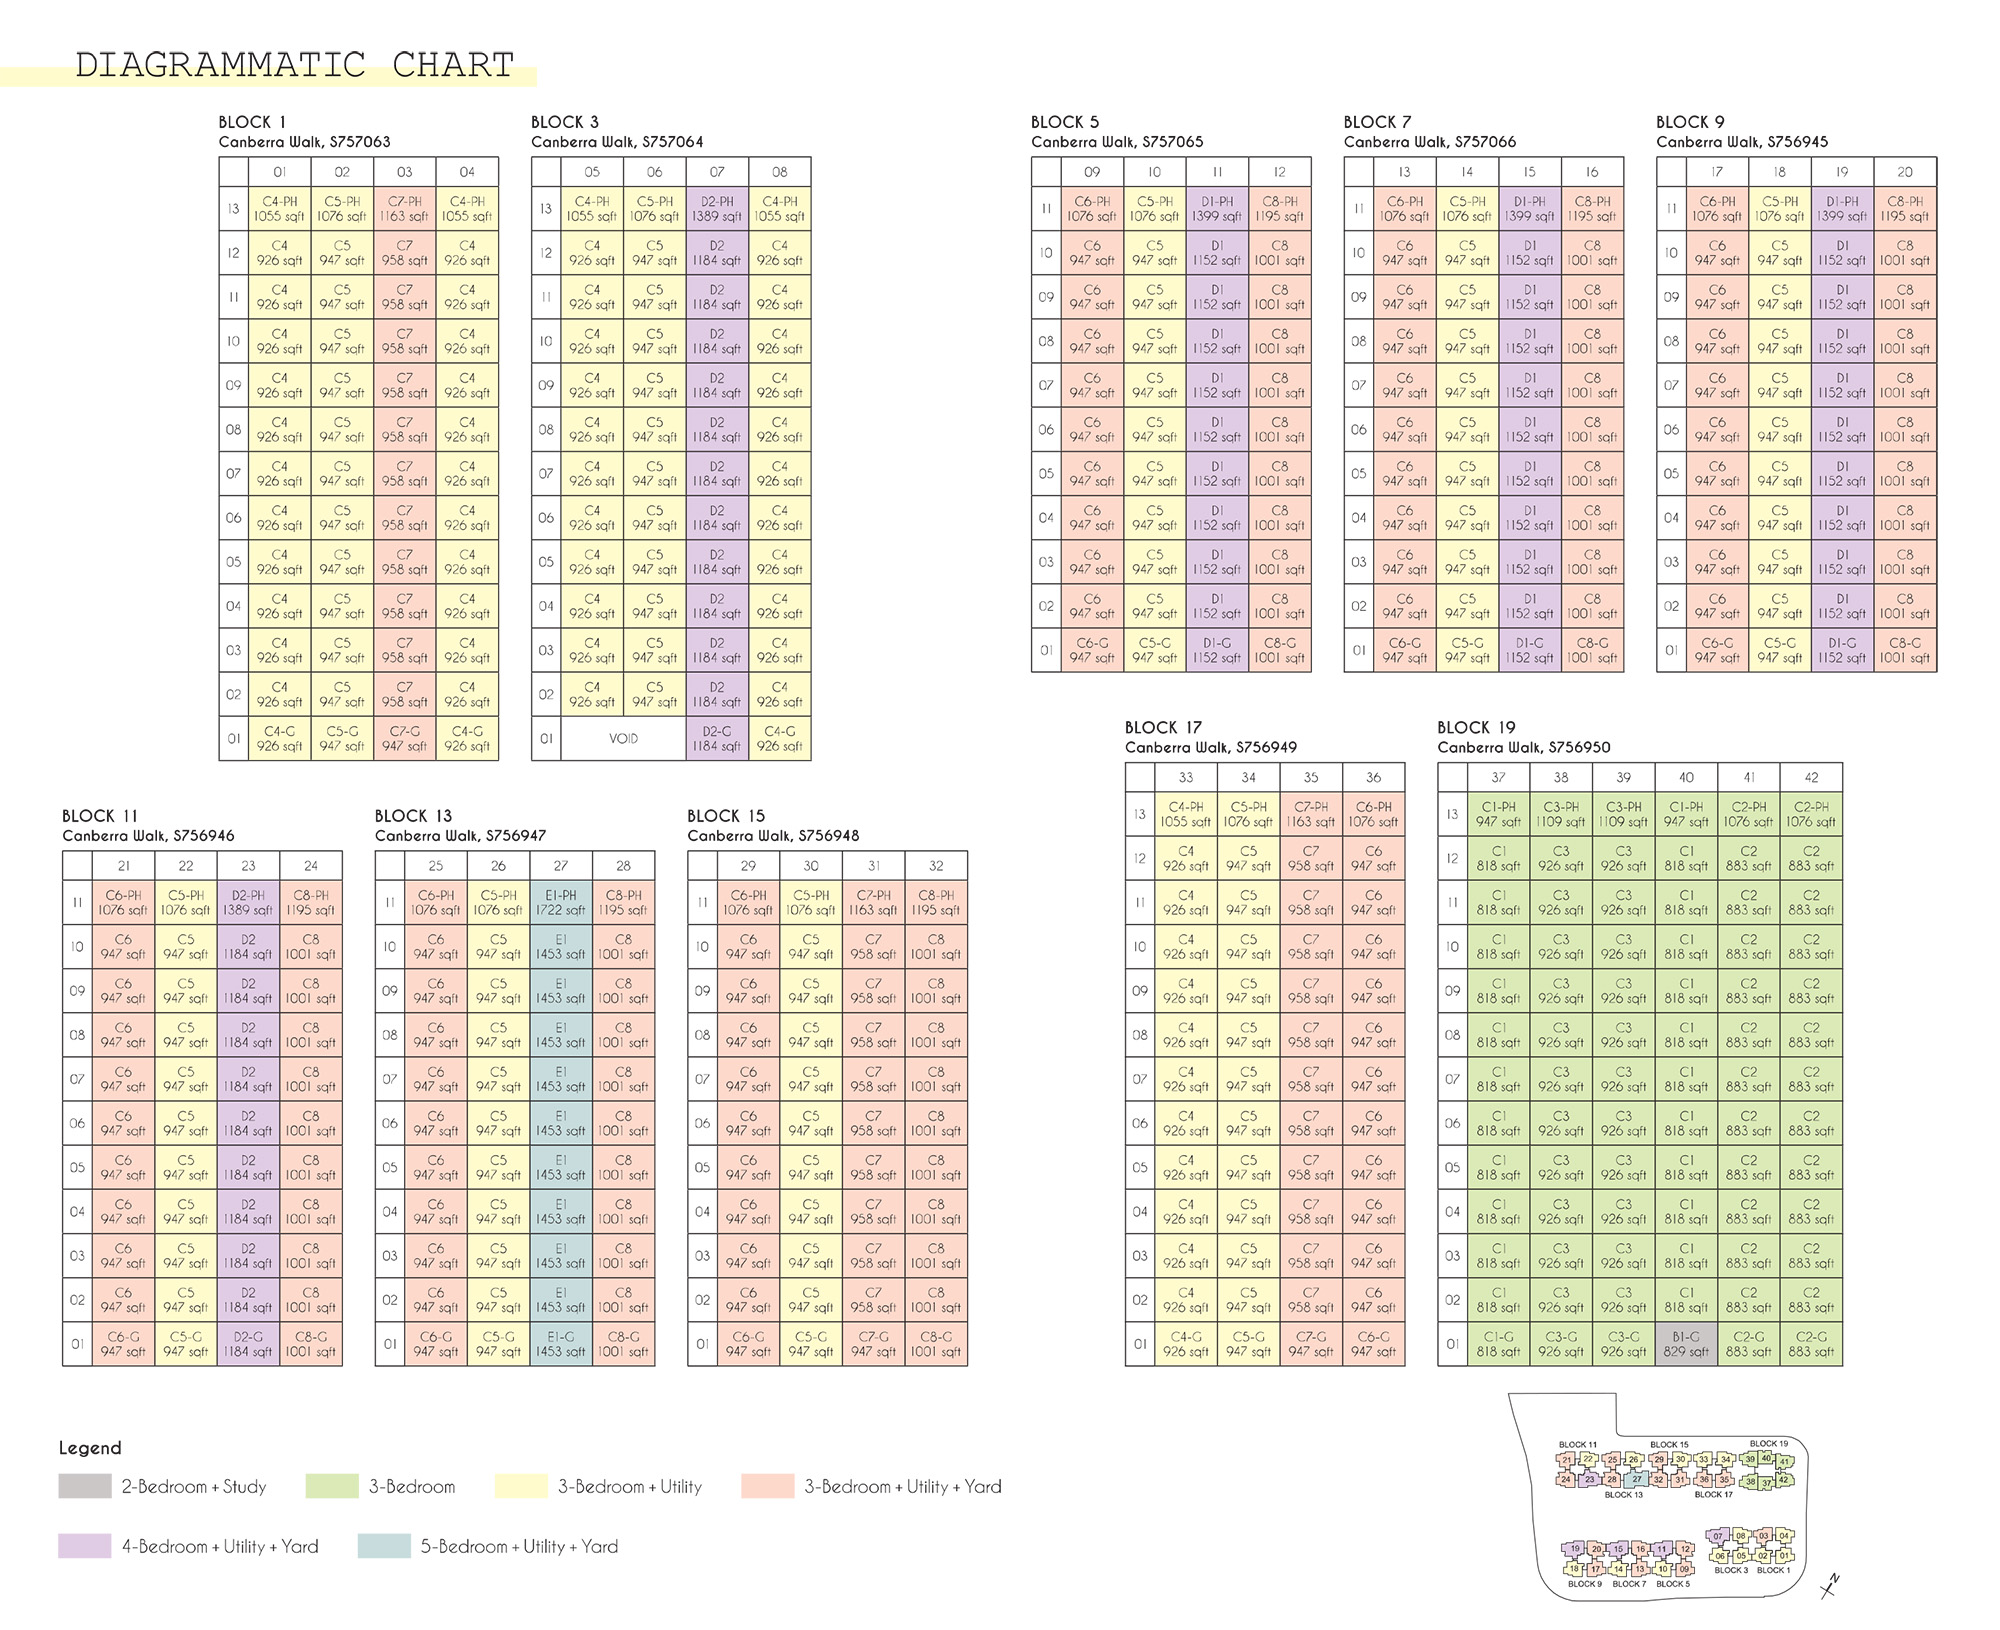 new-condo-singapore-parc-canberra-diagrammatic-chart